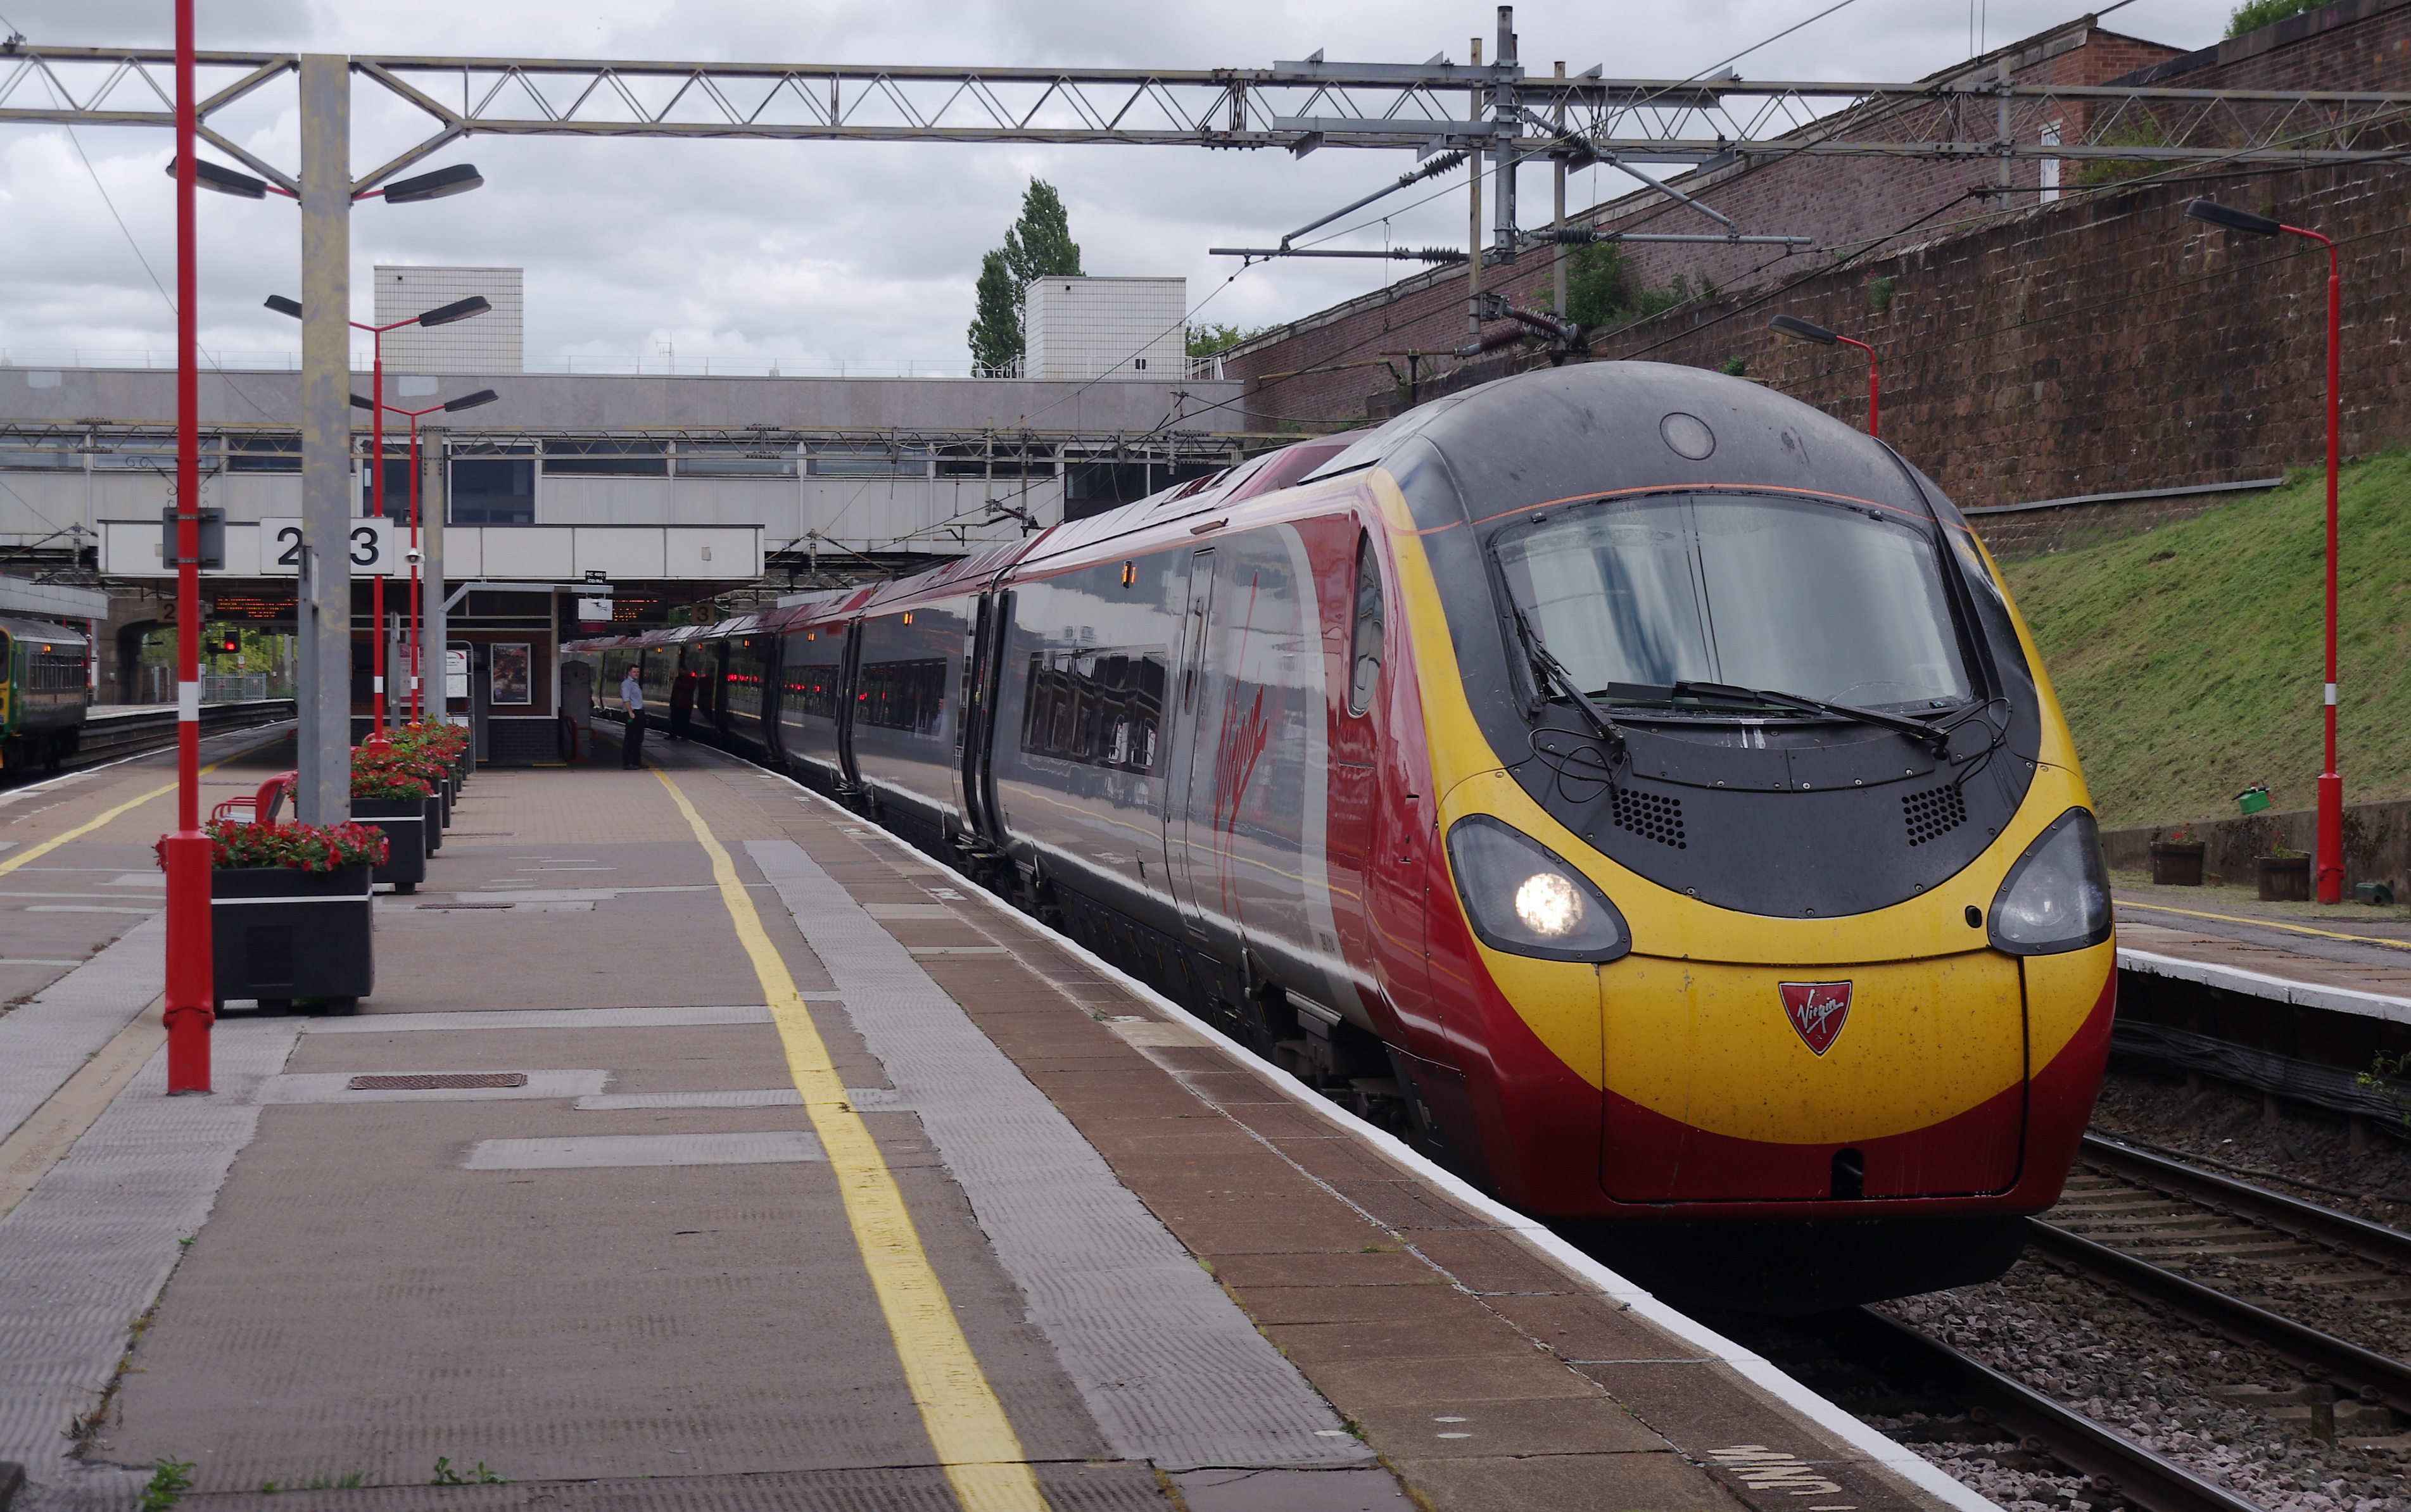 Coventry railway station MMB 14 390014